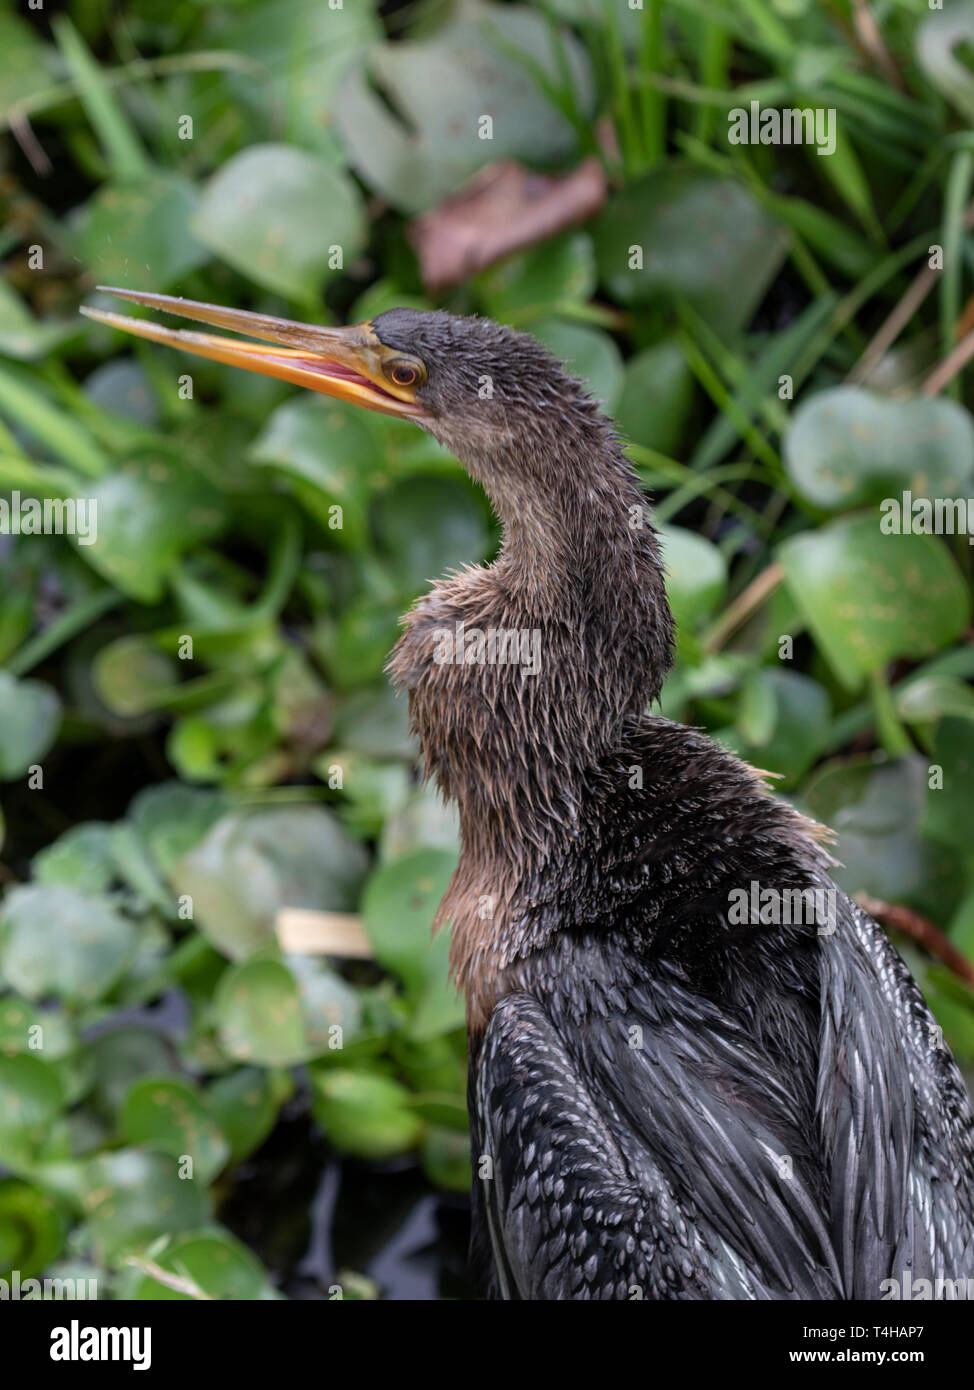 Anhingas are often confused with the Cormorant and an easy way to tell them apart is the bill which is pointed on the Anhinga rather than curved. Stock Photo